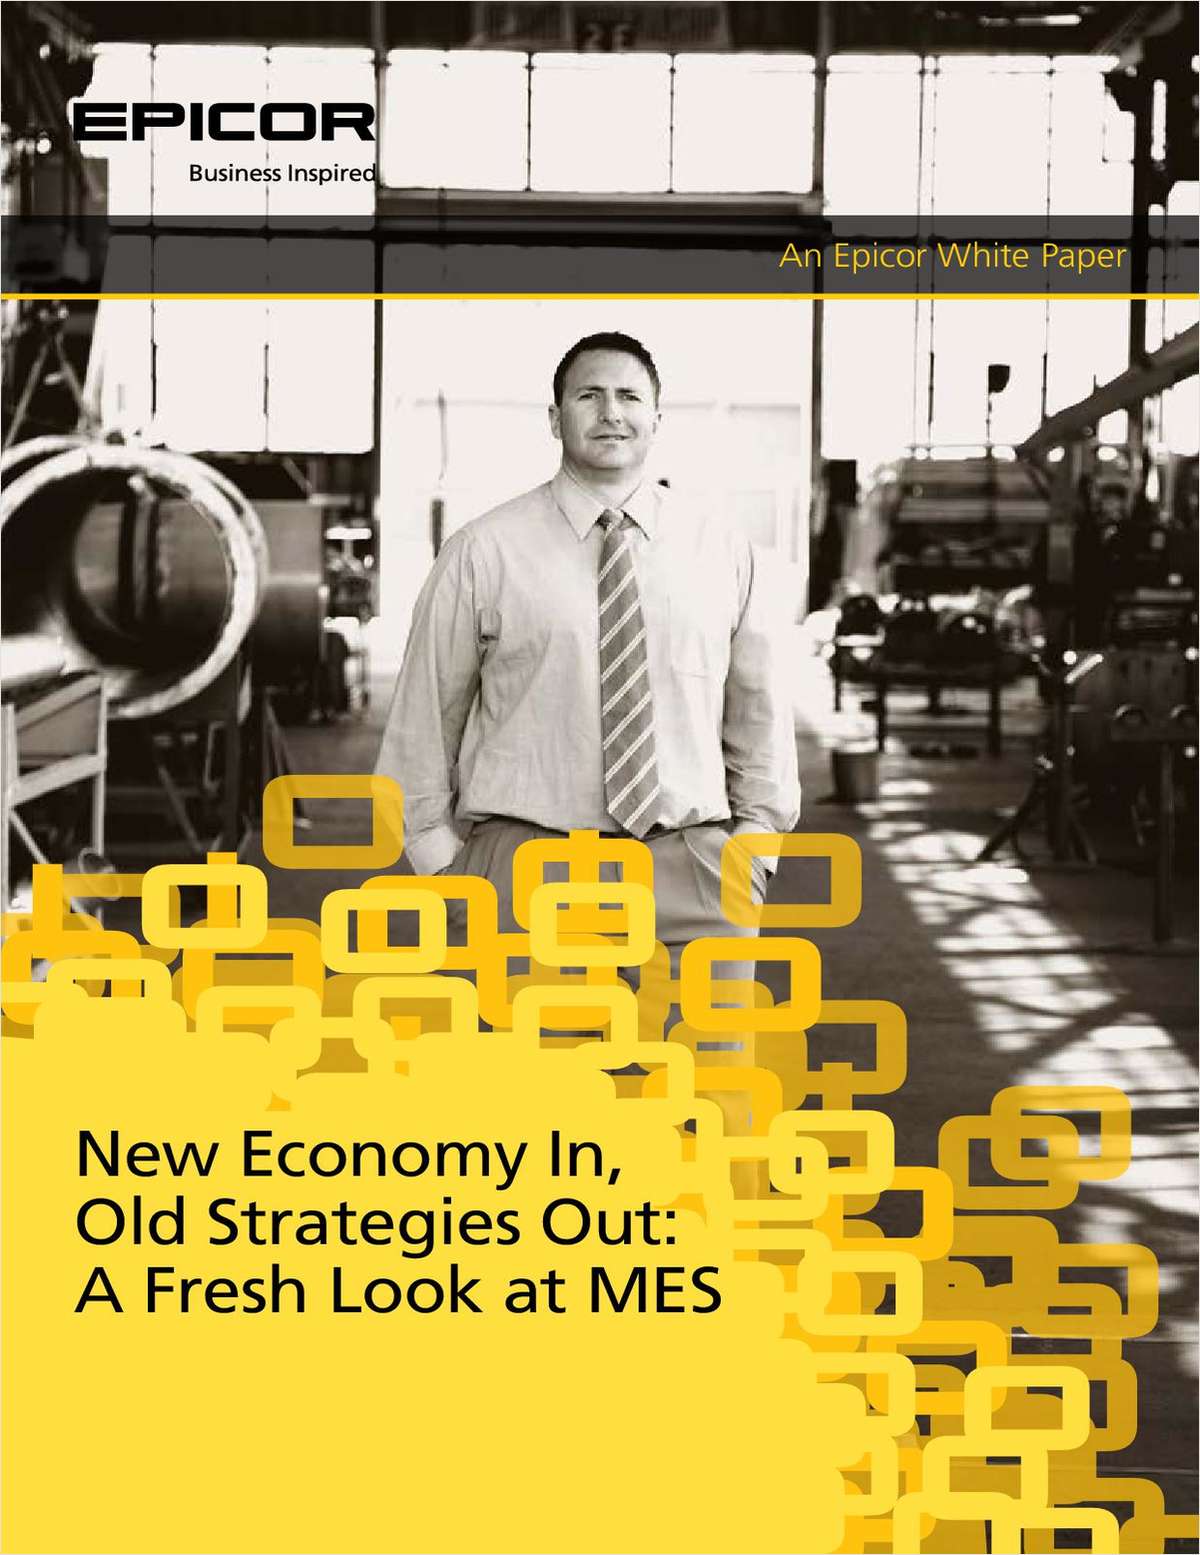 New Economy In, Old Strategies Out: A Fresh Look at MES